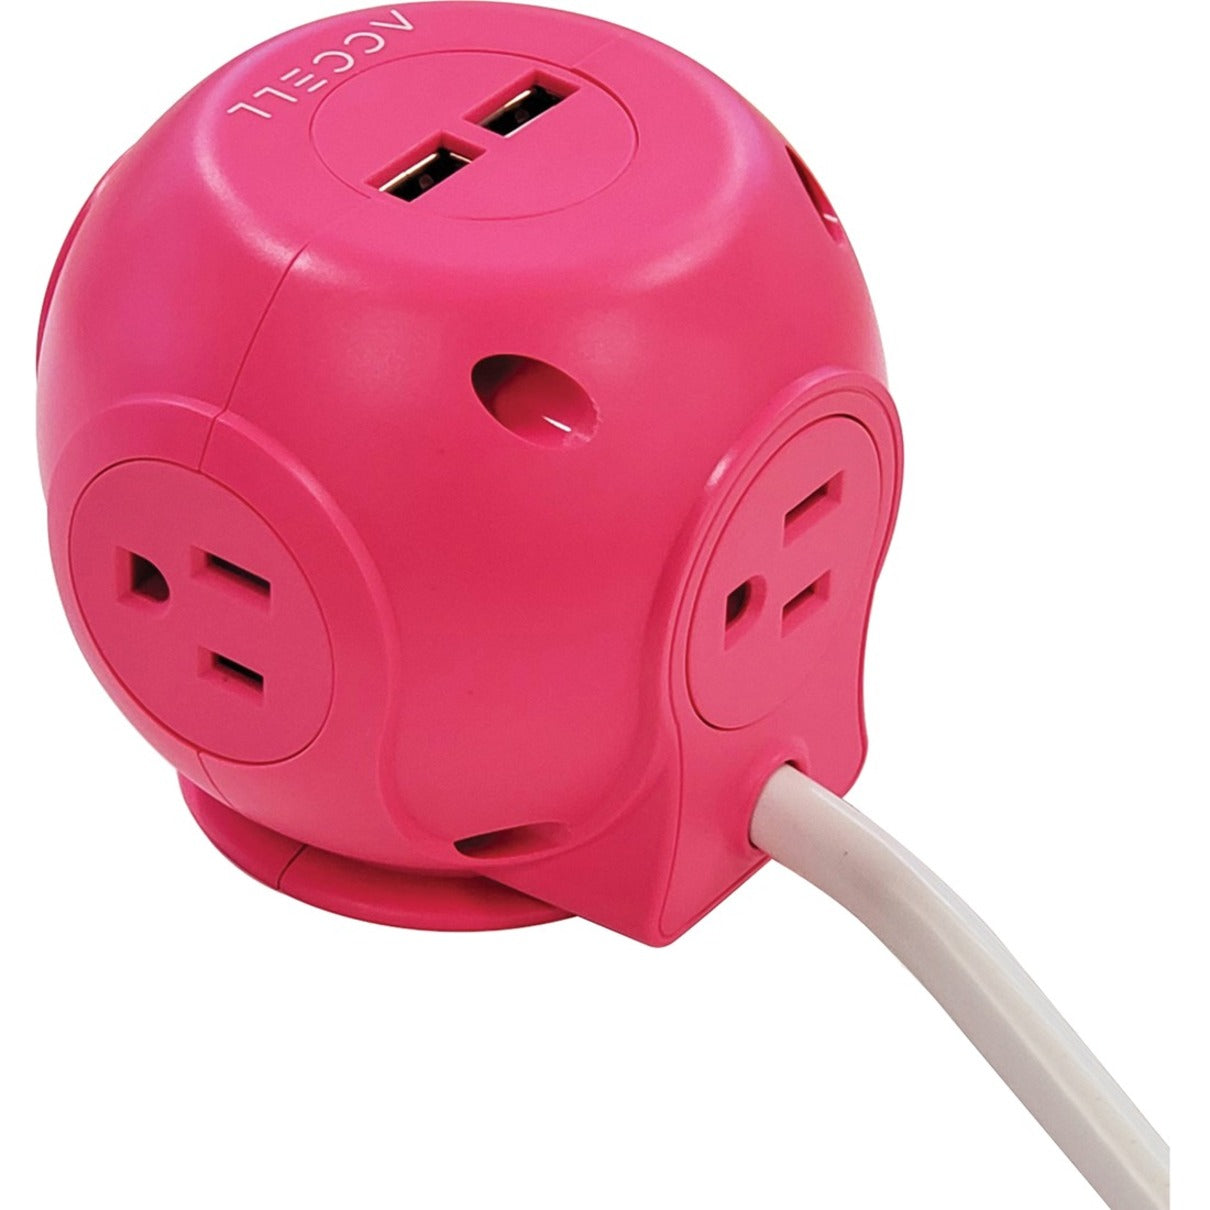 Accell D080B-049P Power Cutie Compact Surge Protector with USB Charging Ports (Pink)